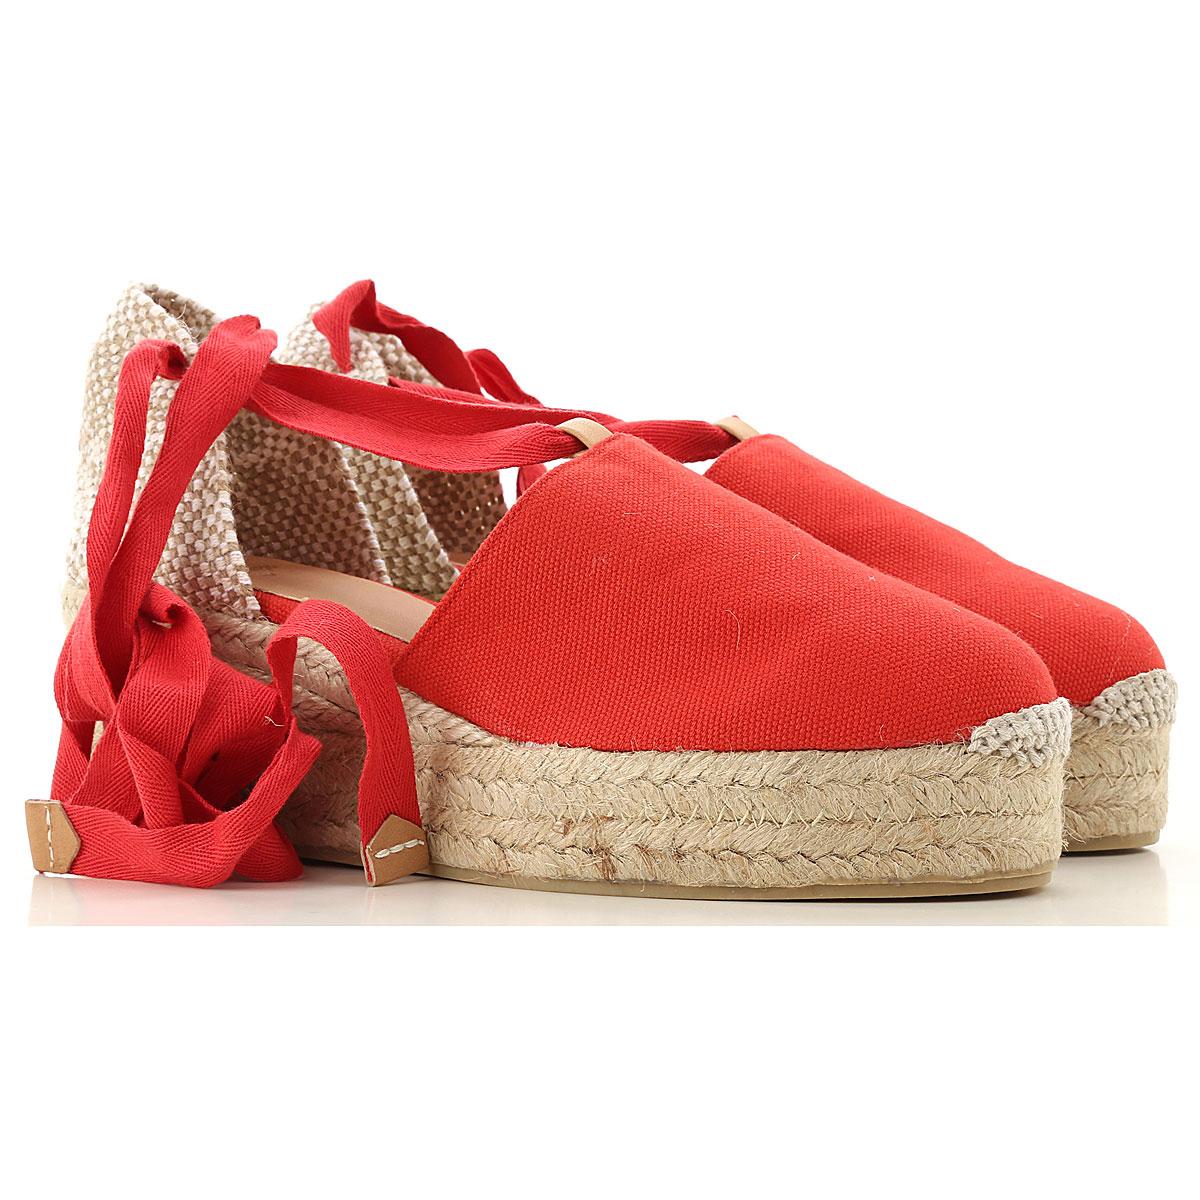 Castaner Canvas Wedges For Women On Sale in Red - Lyst